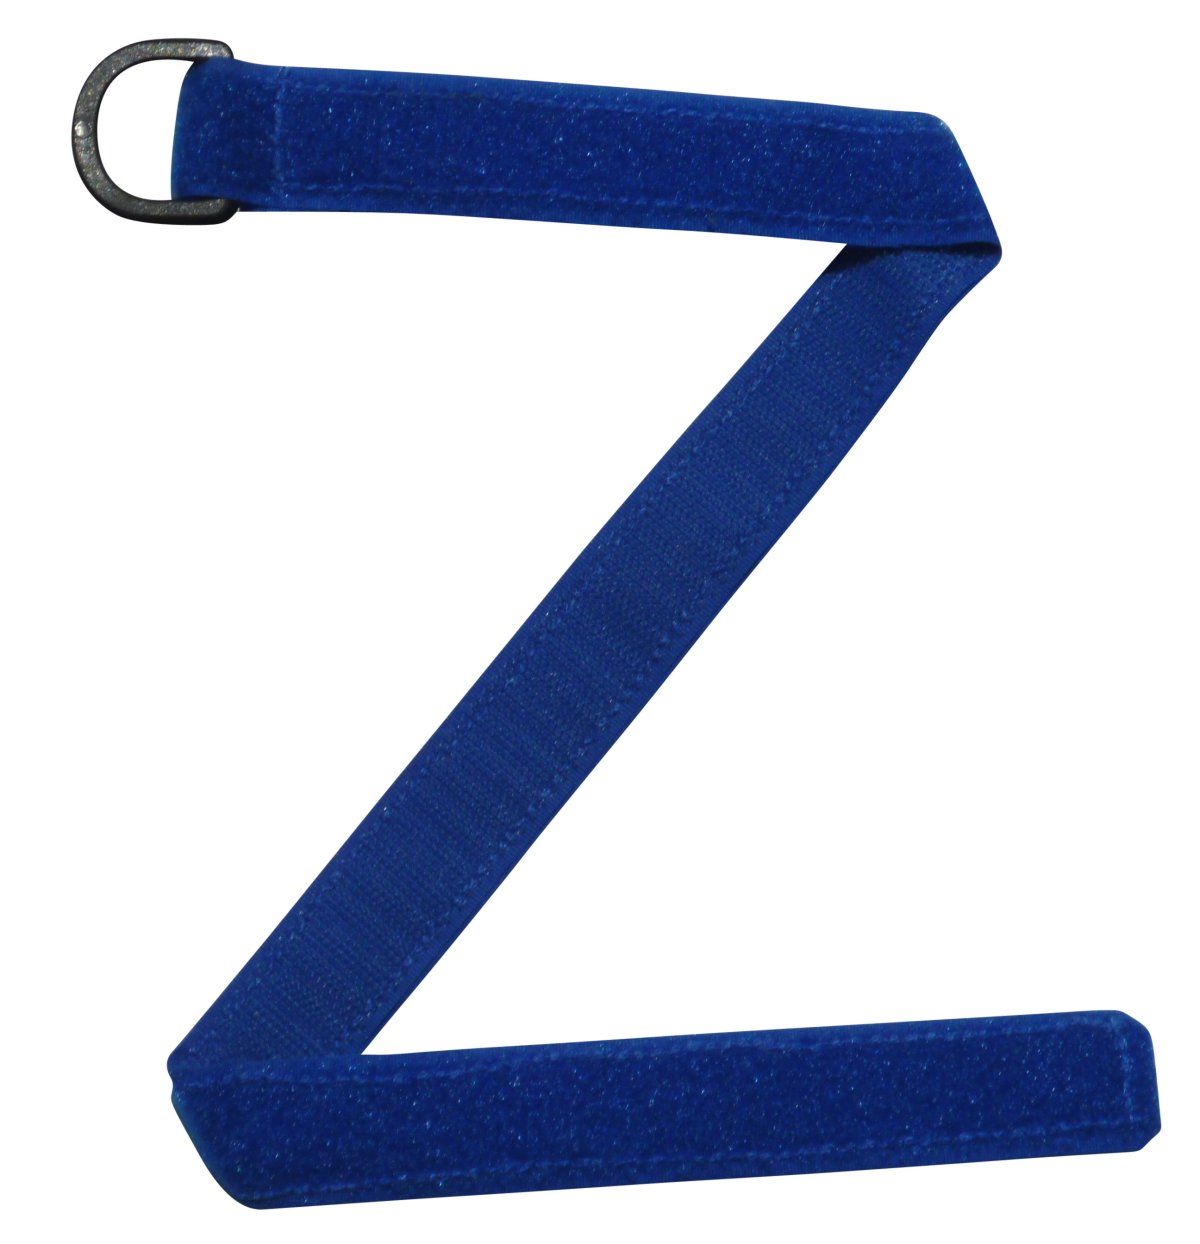 Benristraps 25mm Hook and Loop Strap with D Ring (Pair) in blue